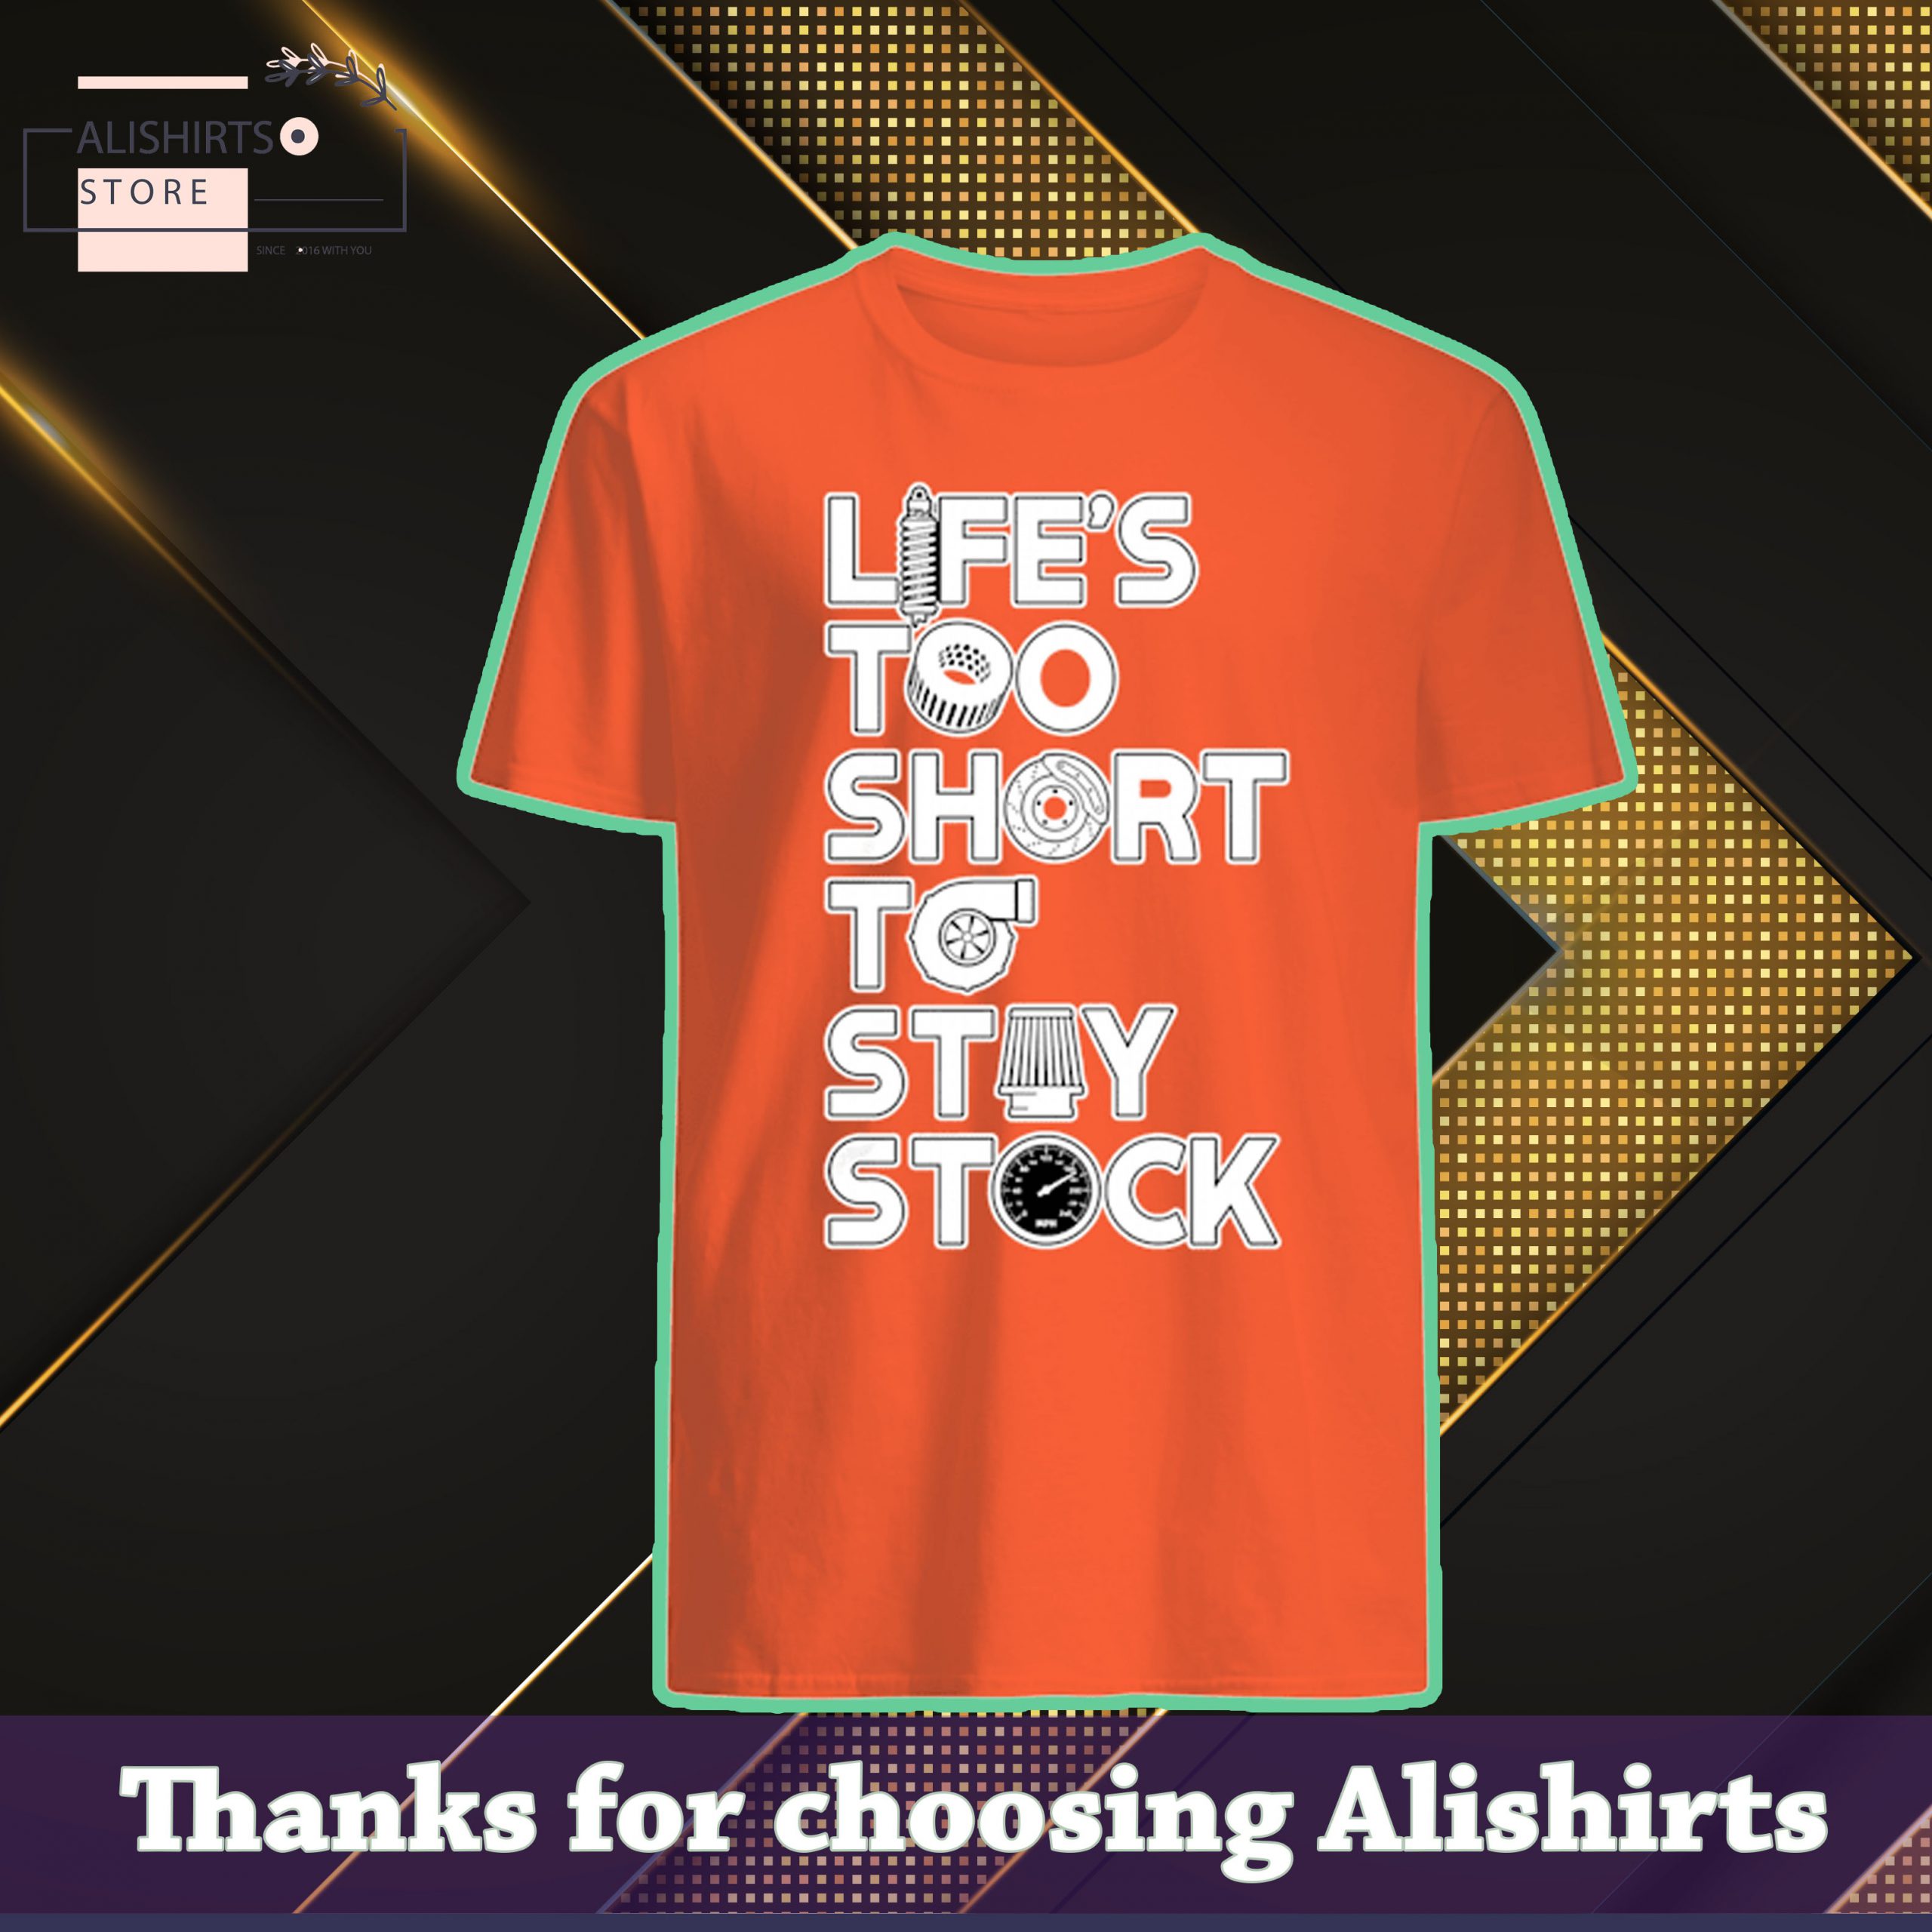 Lifes too short to stay stock shirt